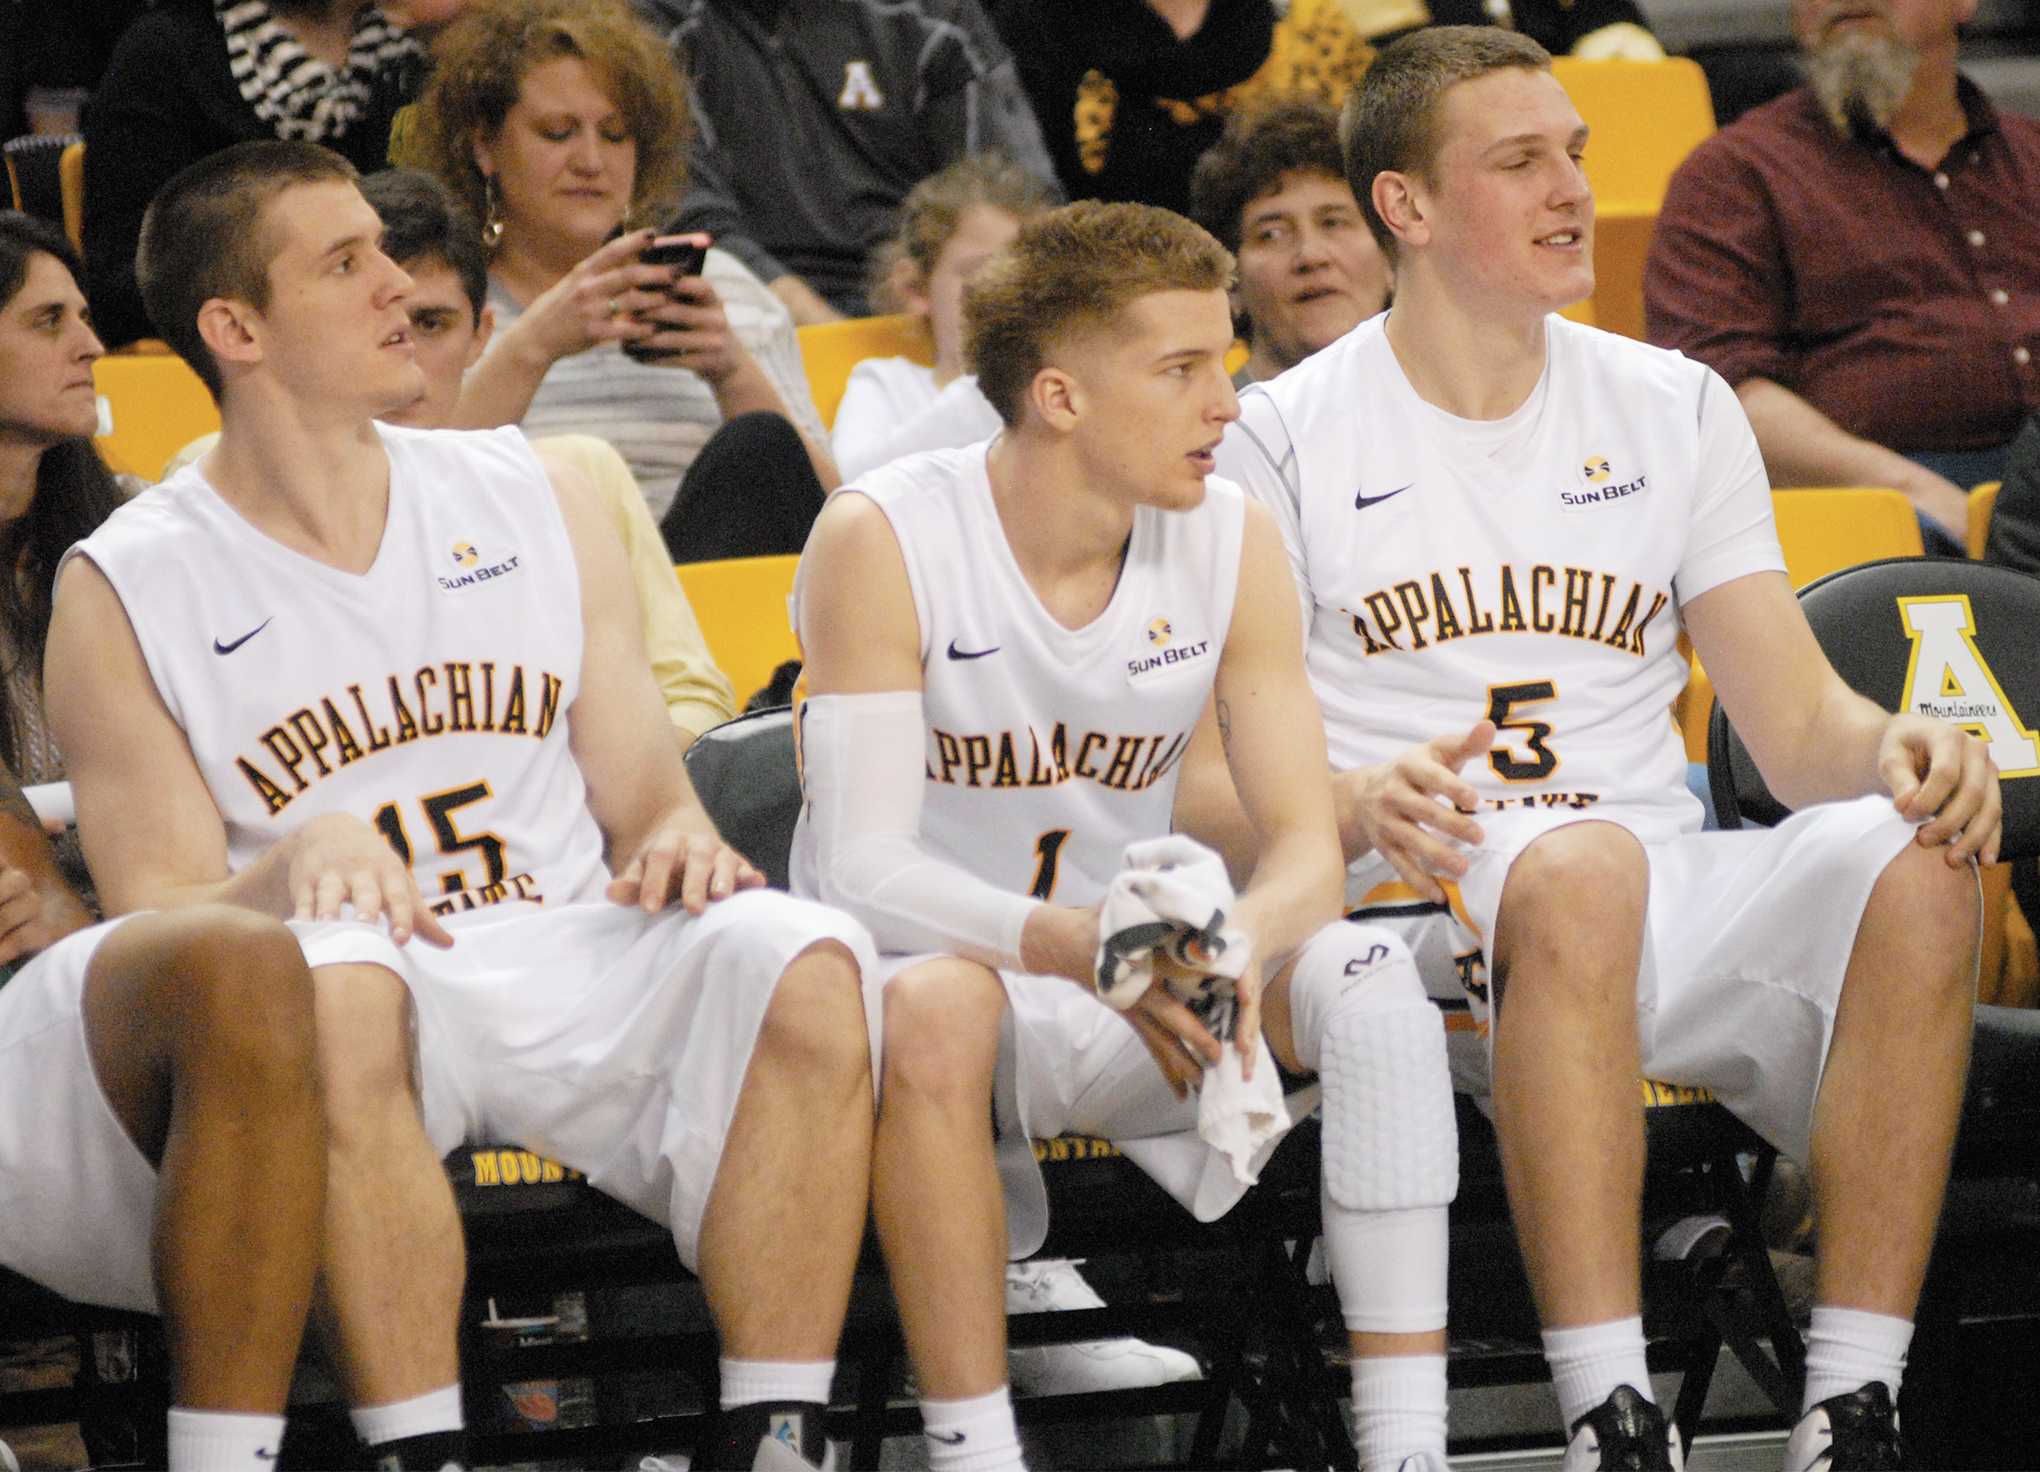 (Left to right) Fifth-year senior forward Tommy Spagnolo, freshman guard Landon Goesling and freshman forward Griffin Kinney watch the action from the bench against Troy. Photo by Corey Spiers  |  The Appalachian